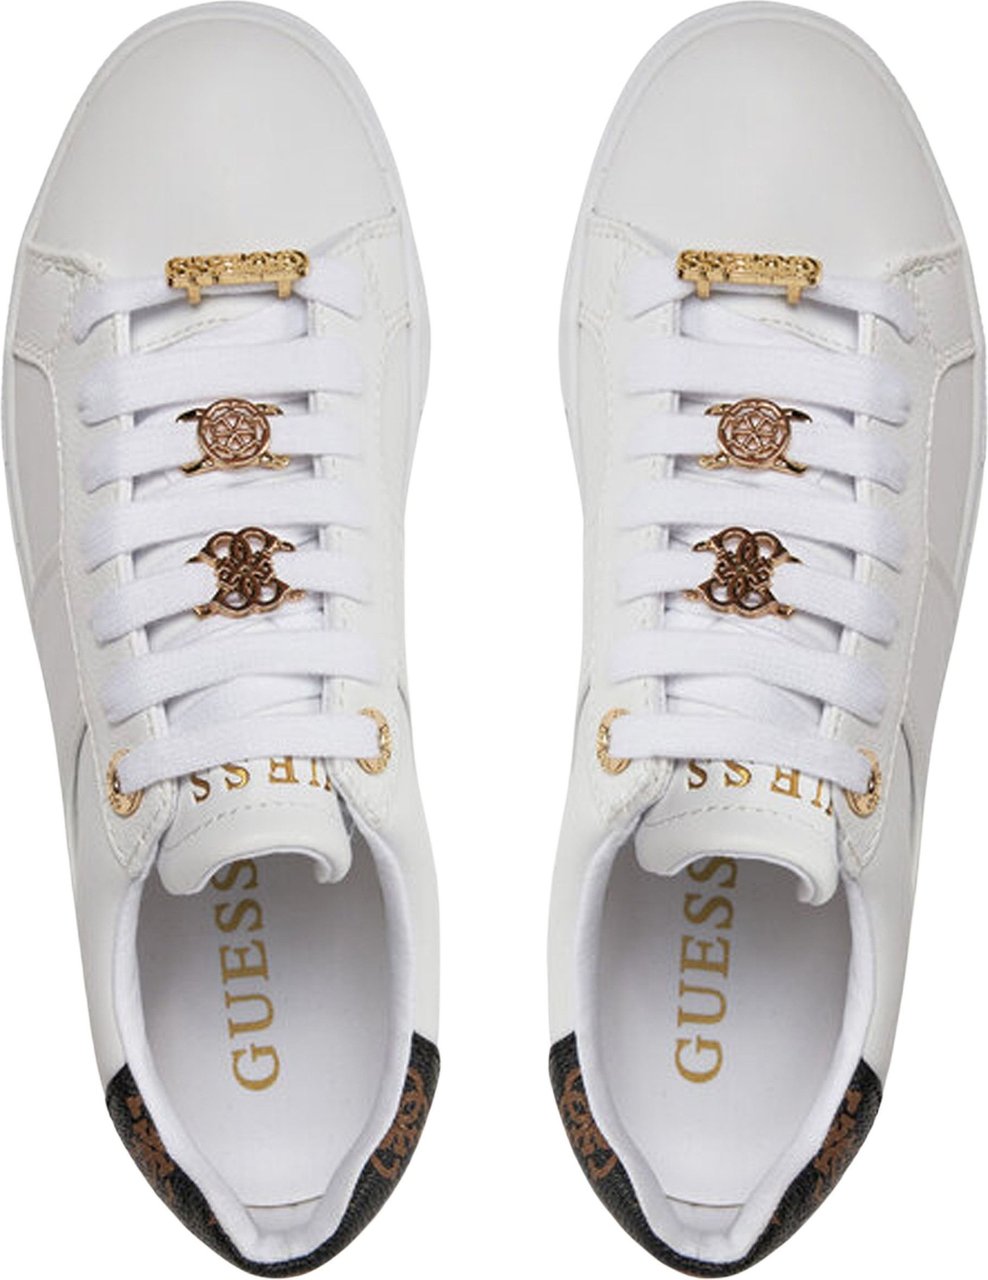 Guess Giella Sneaker Wit